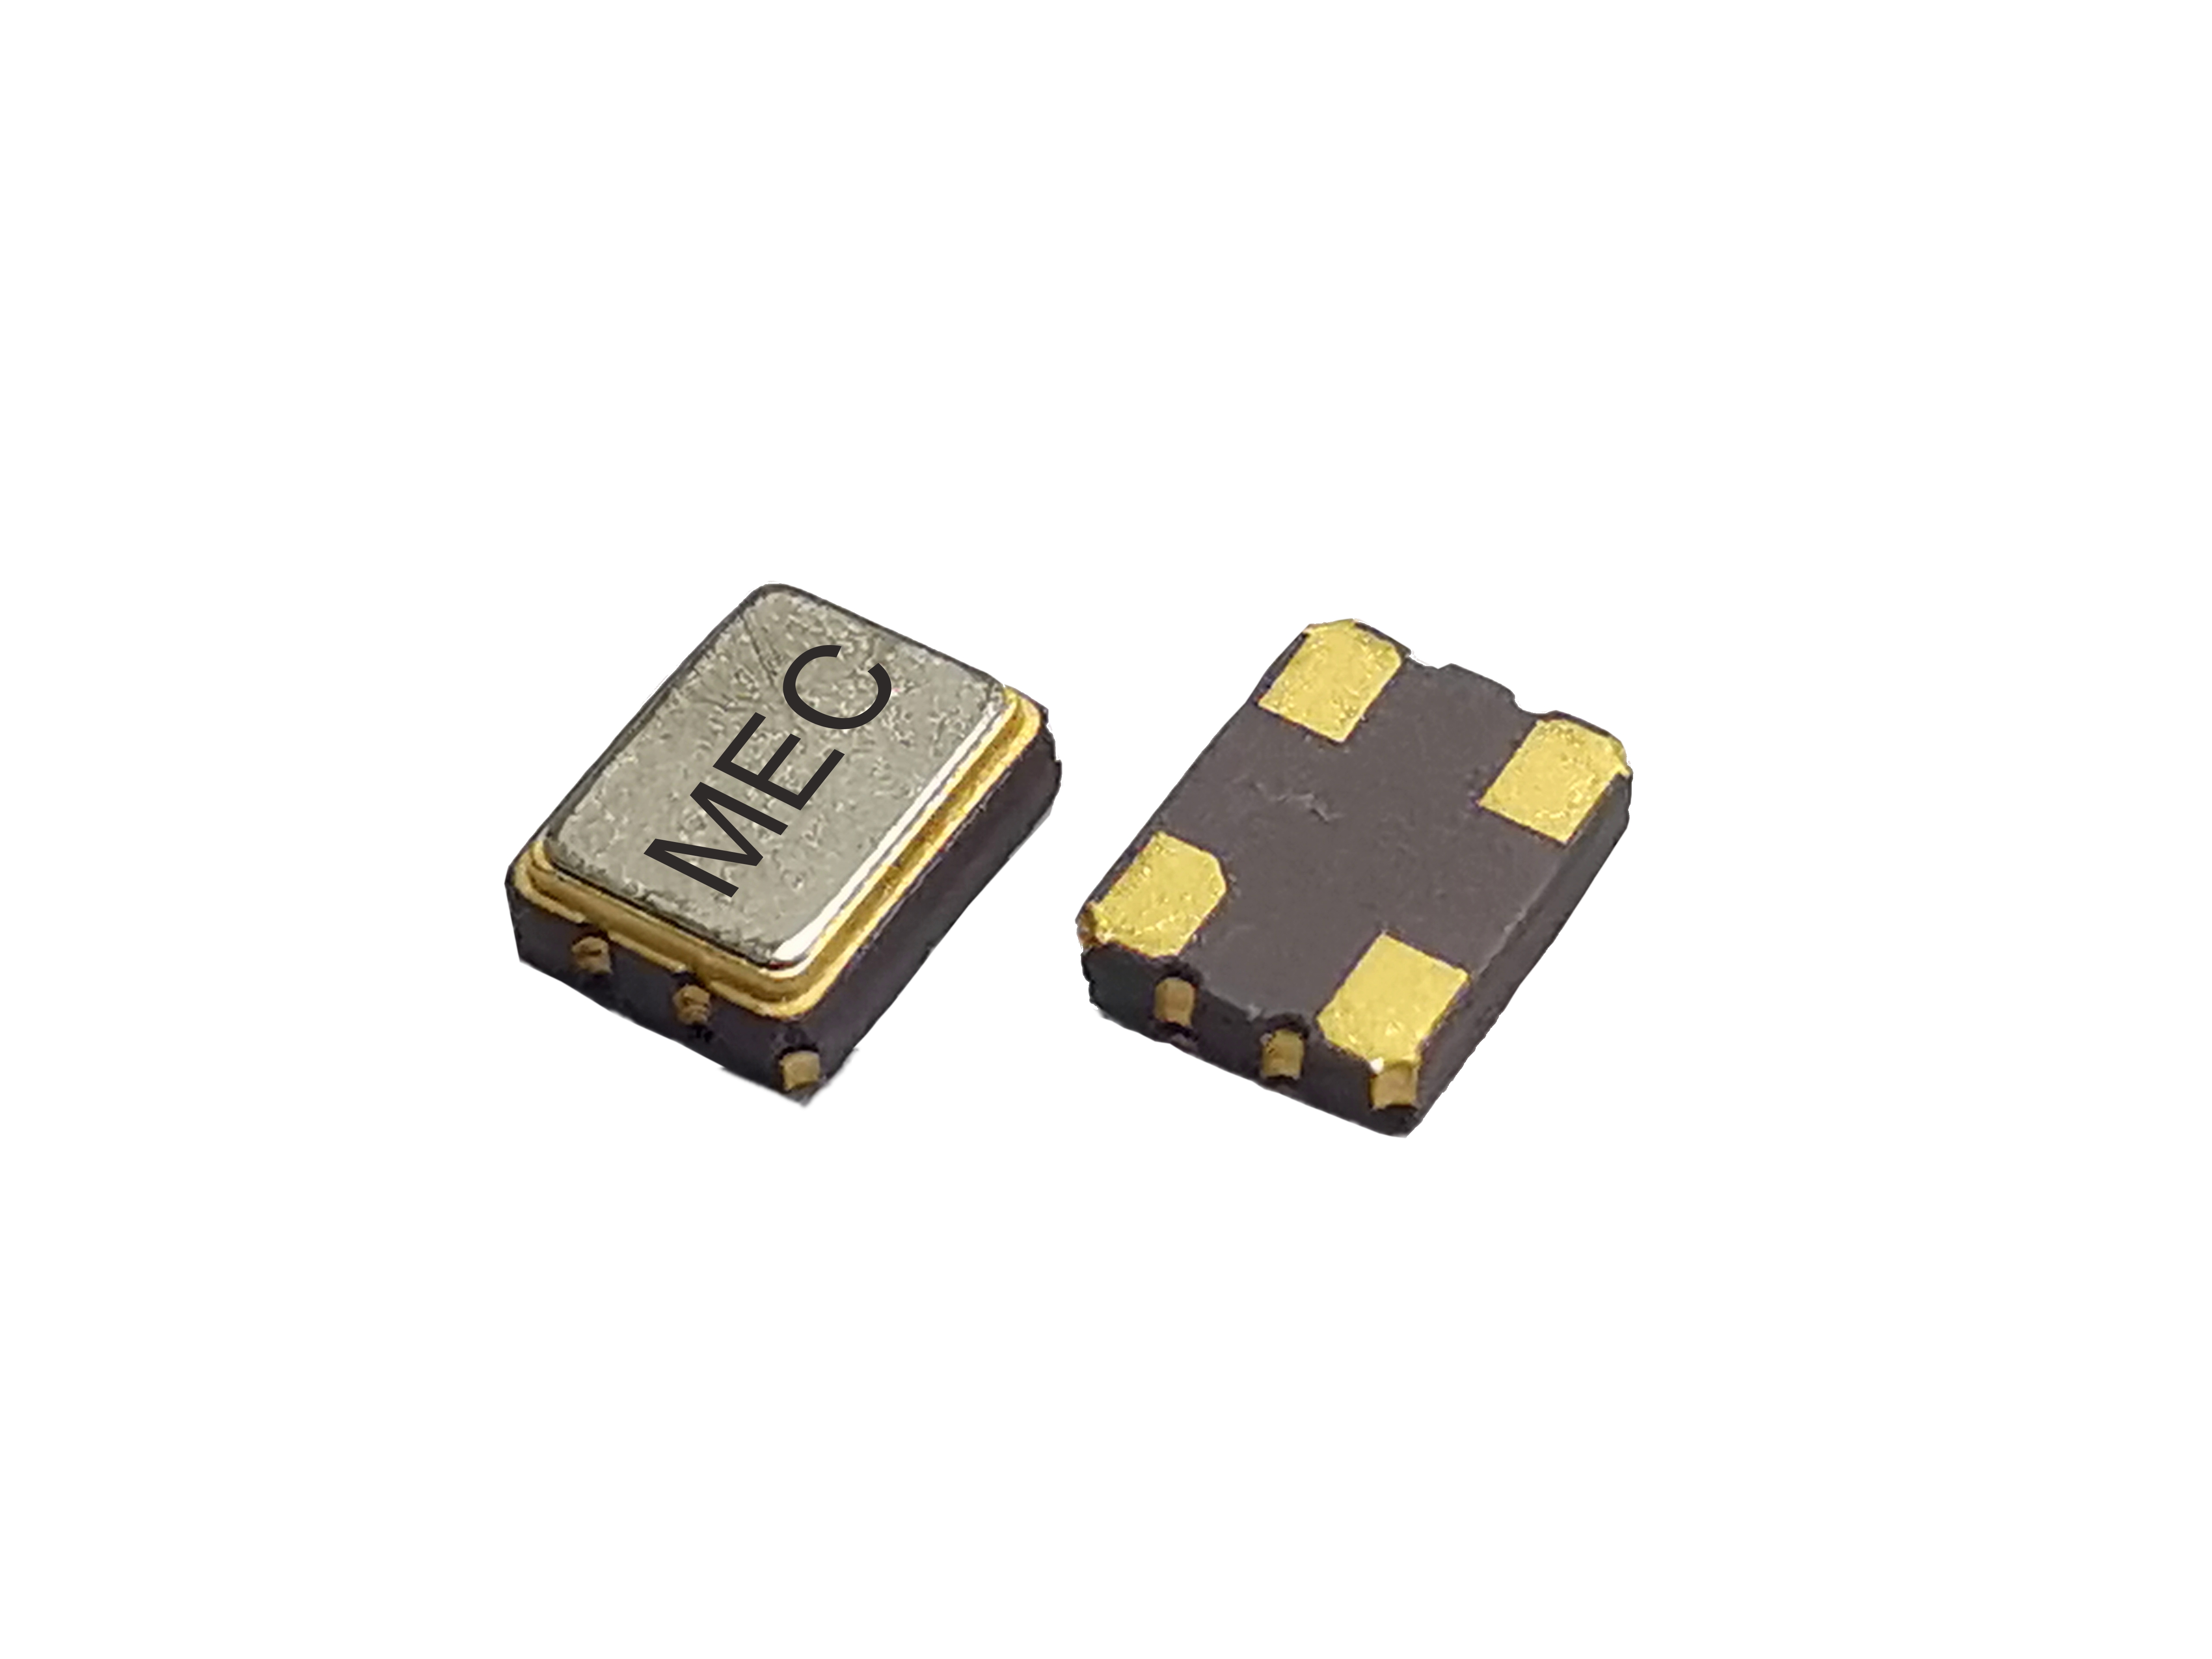 HY32 3225 1.8V Wide Operating Temperature -40℃ to +125℃ CMOS SMD Crystal Oscillator